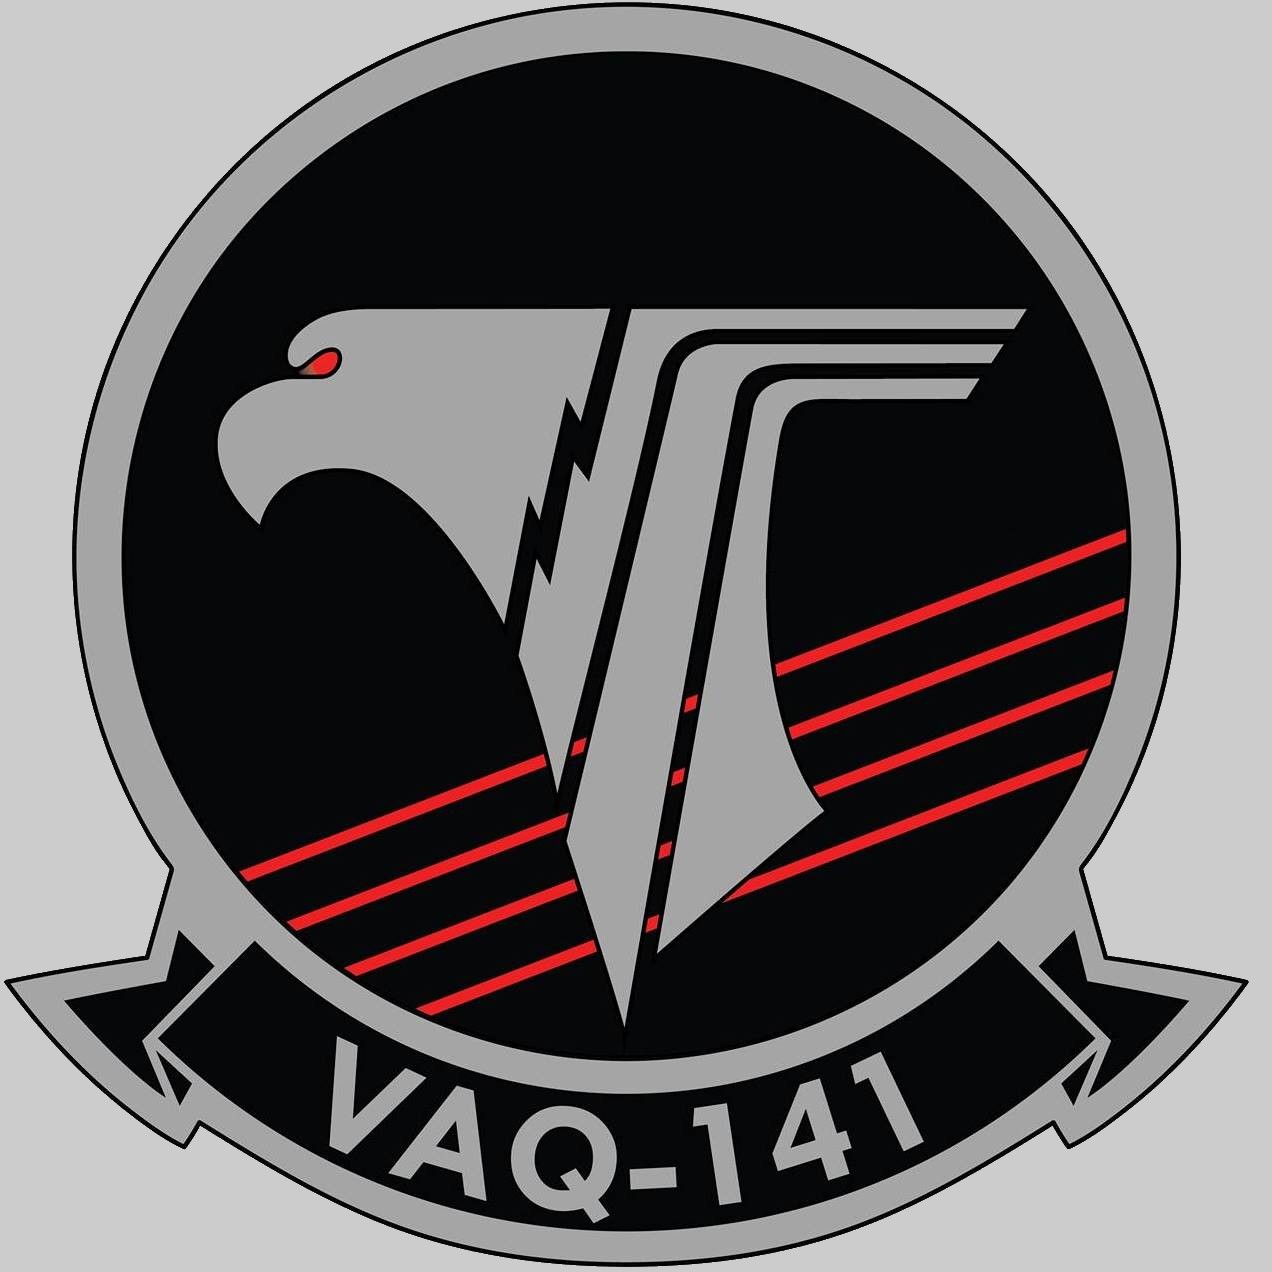 vaq-141 shadowhawks insignia crest patch badge electronic attack squadron ea-18g growler cvw-5 02c